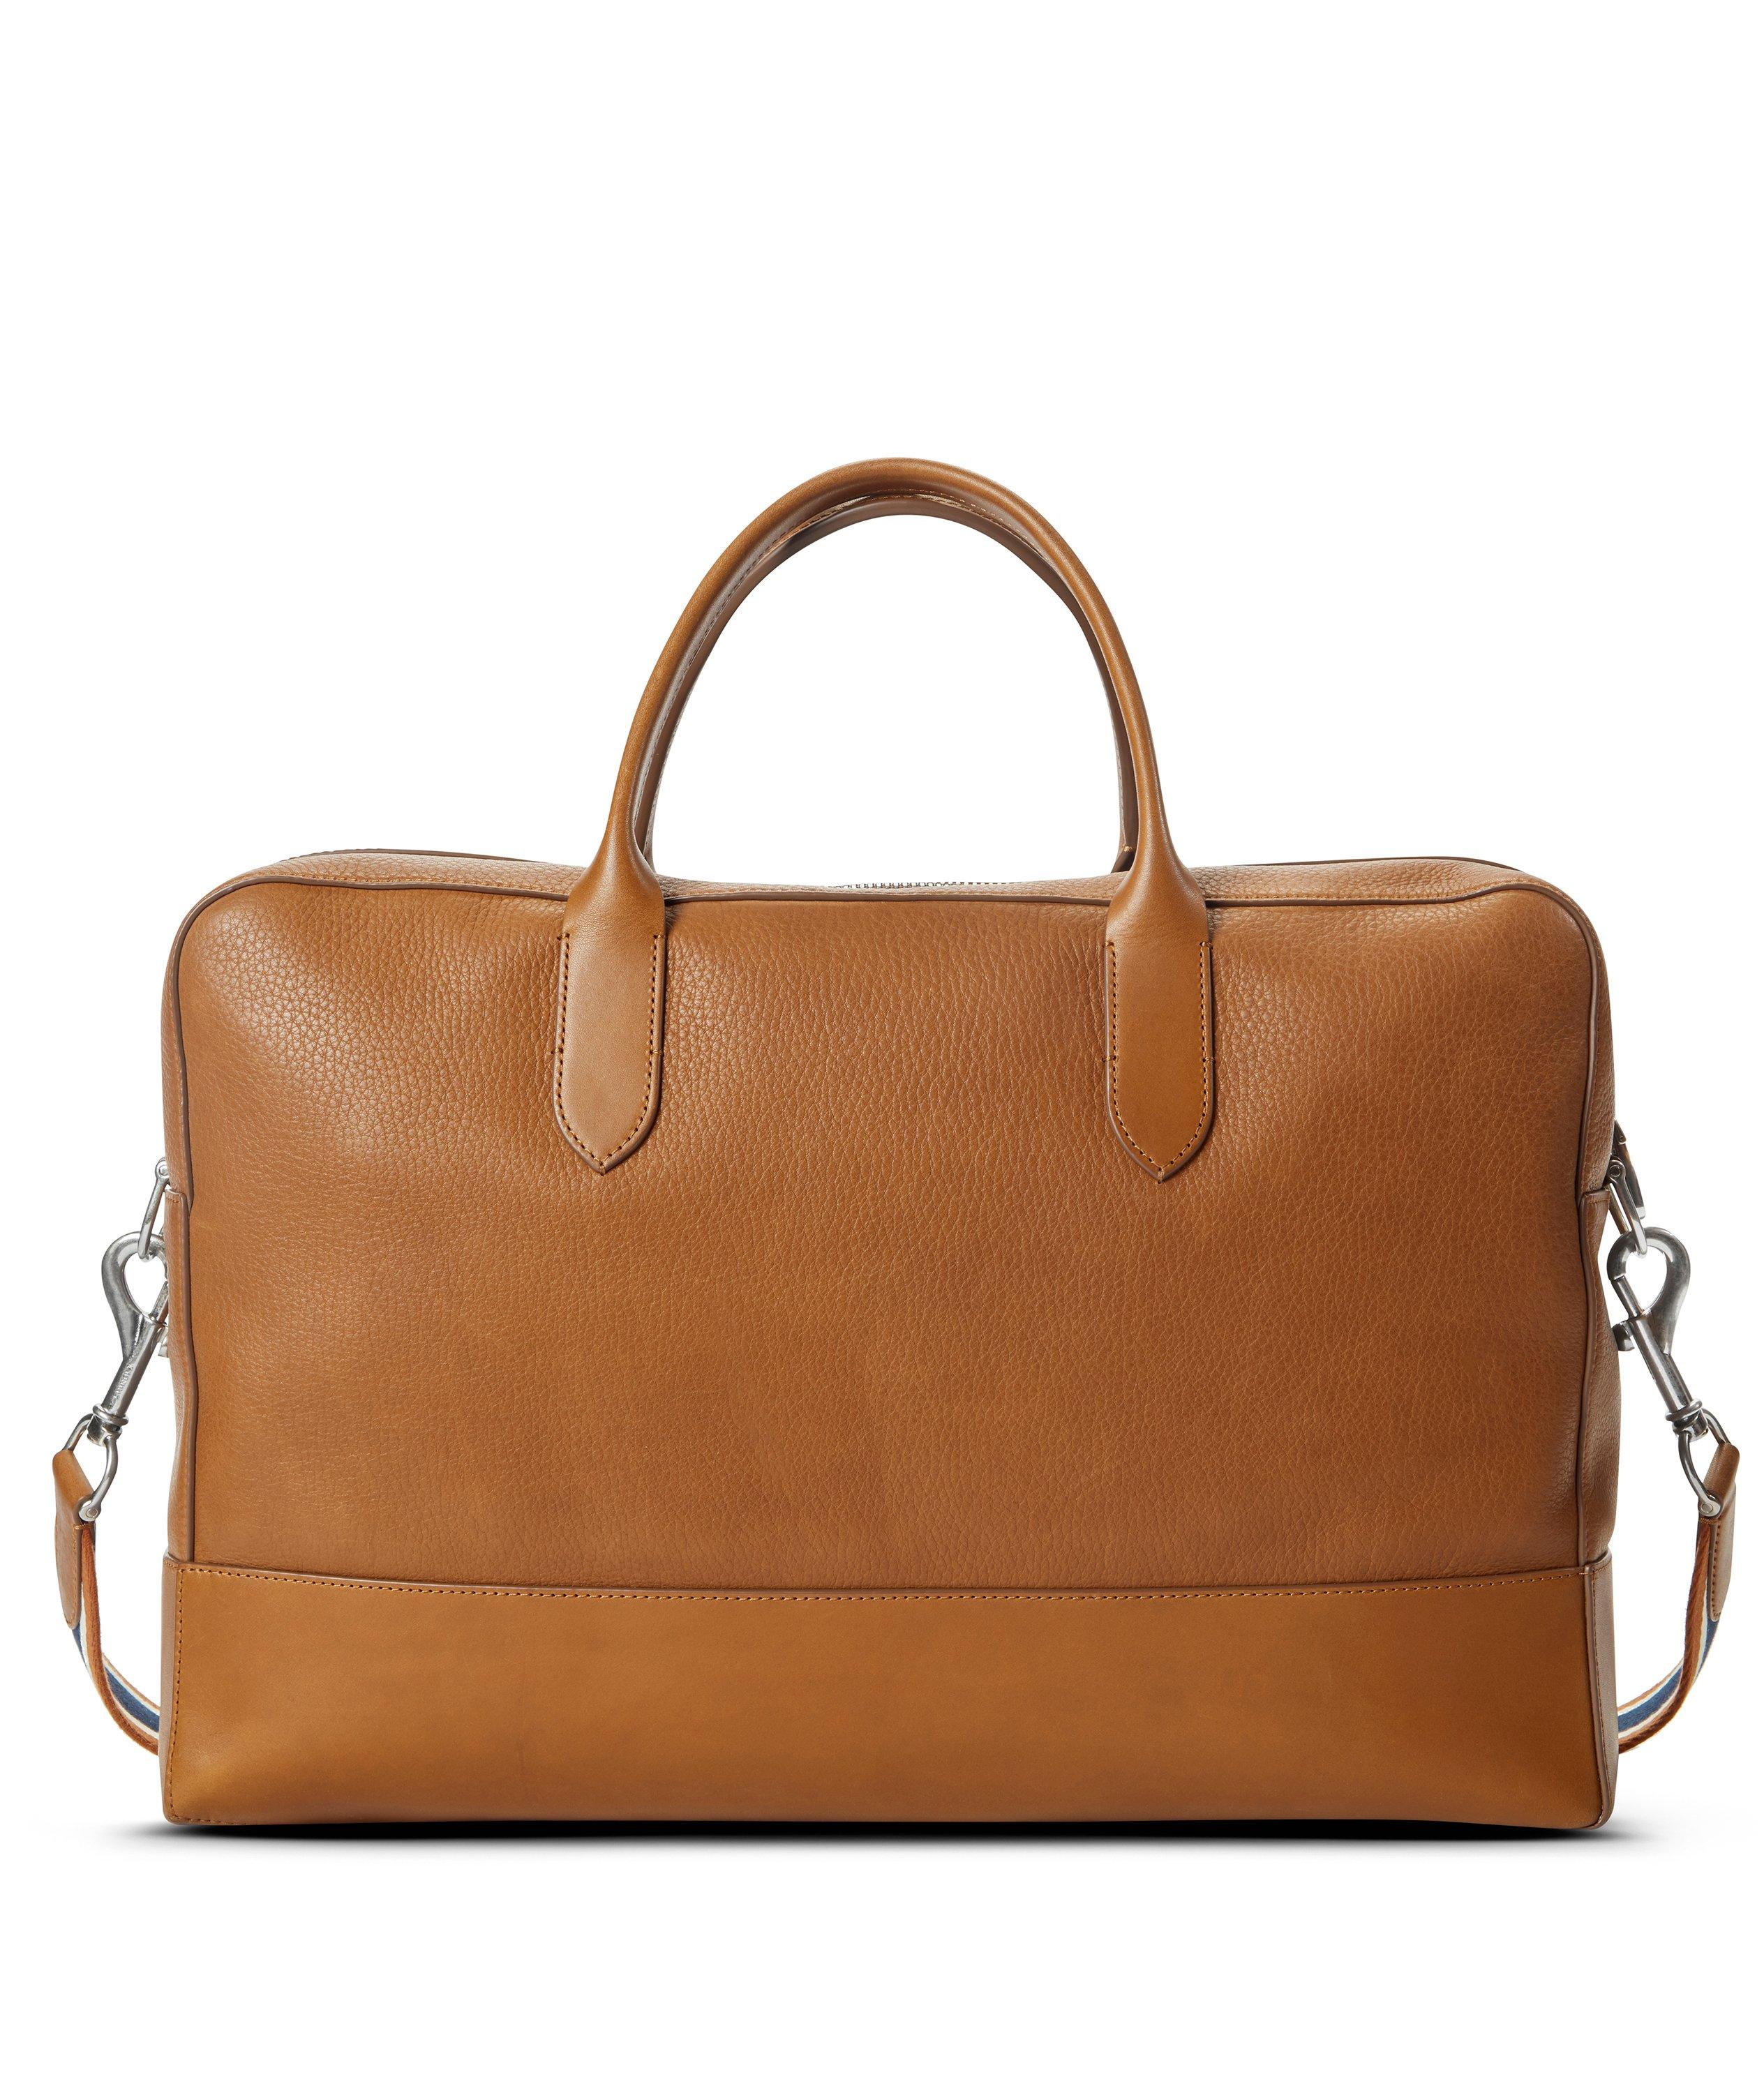 Canfield Double Zip Navigator Grain Leather Briefcase image 2